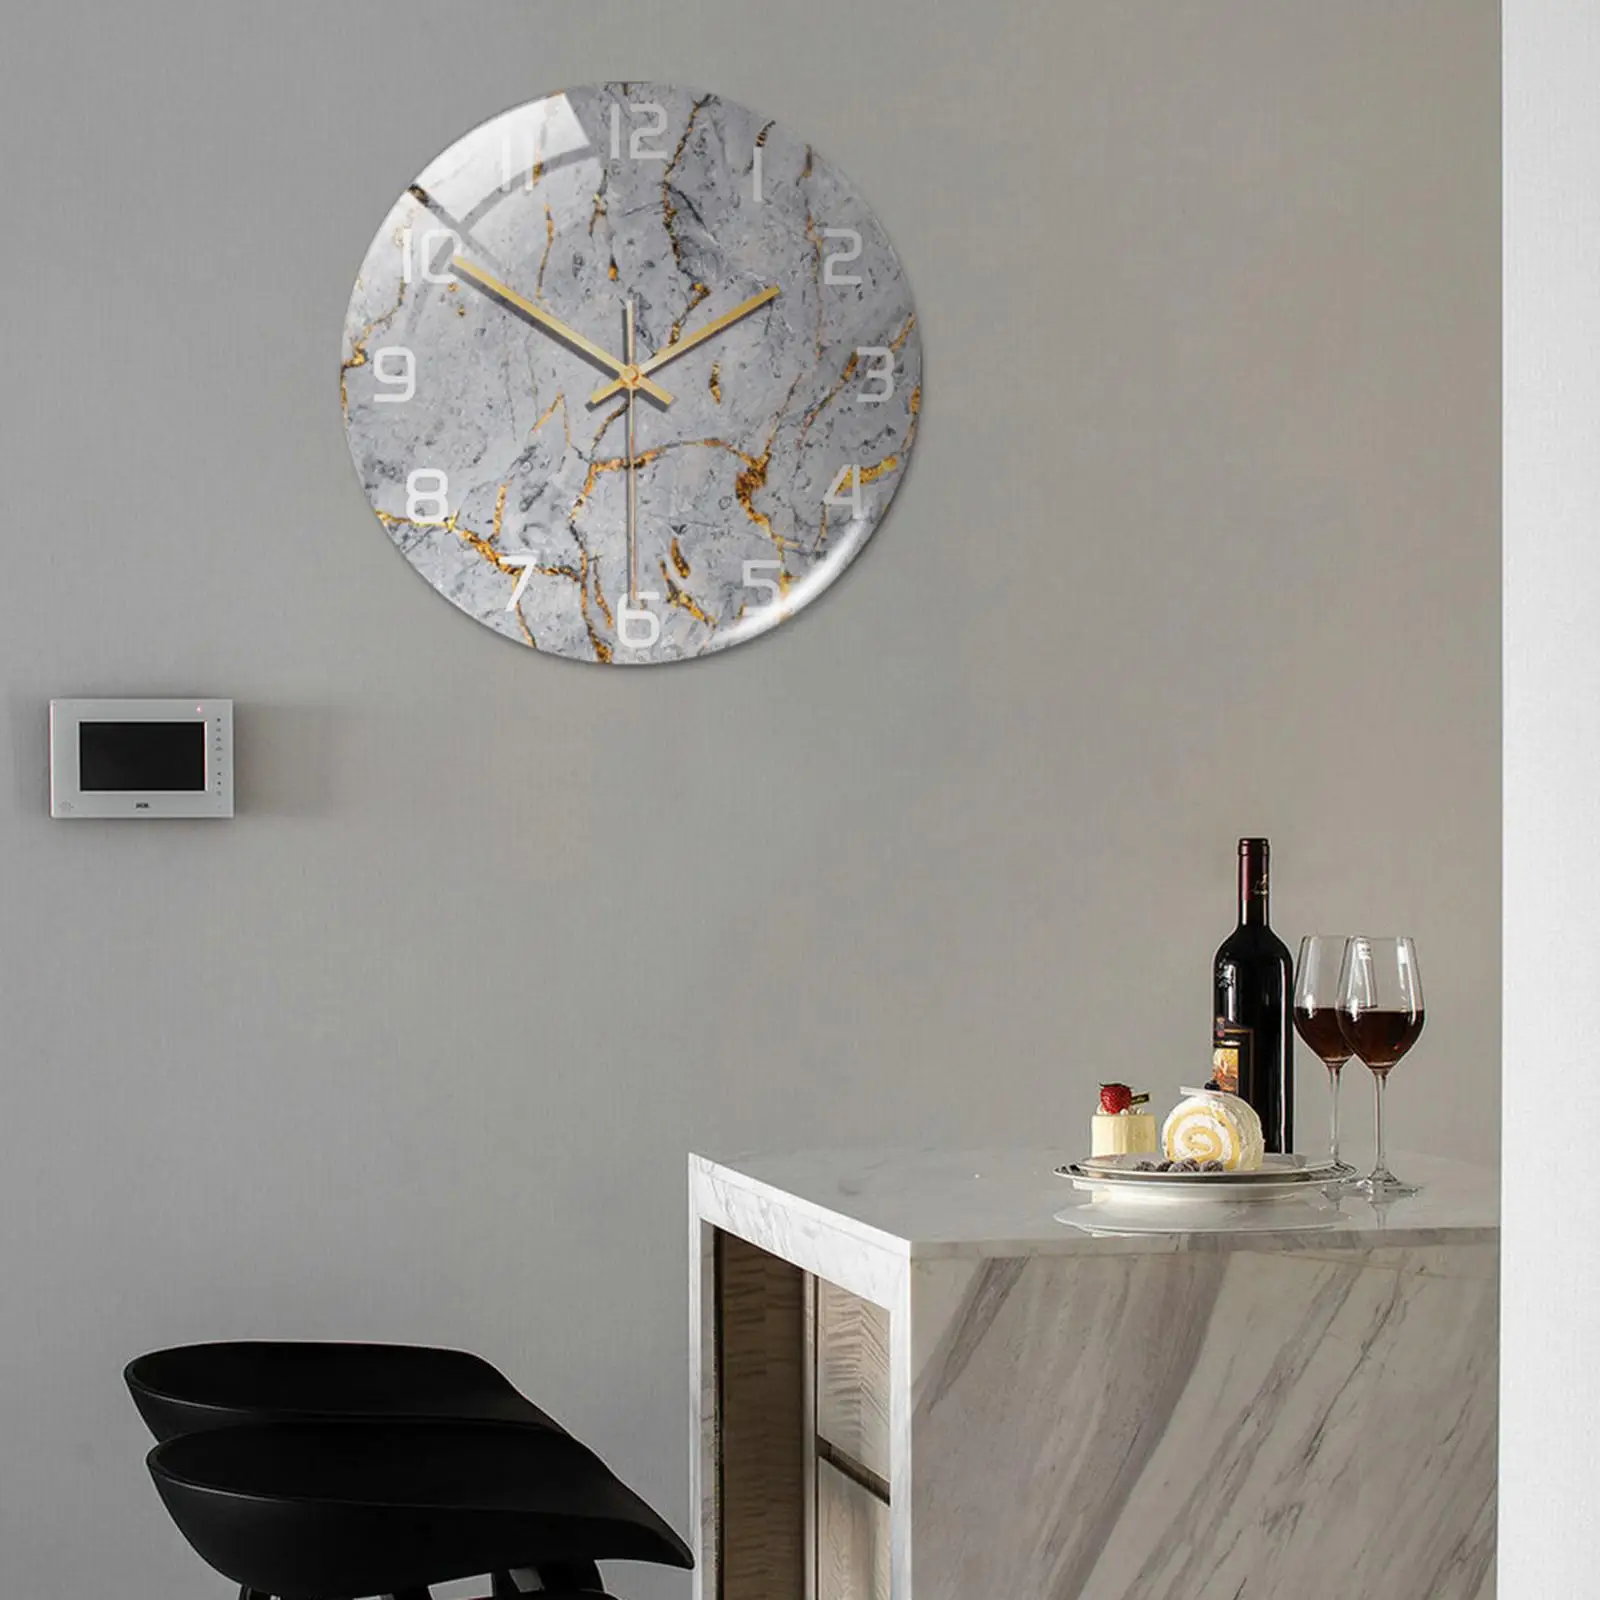 Wall Clock Marble Texture Silent Non Ticking Decorative for Bedroom Kitchen